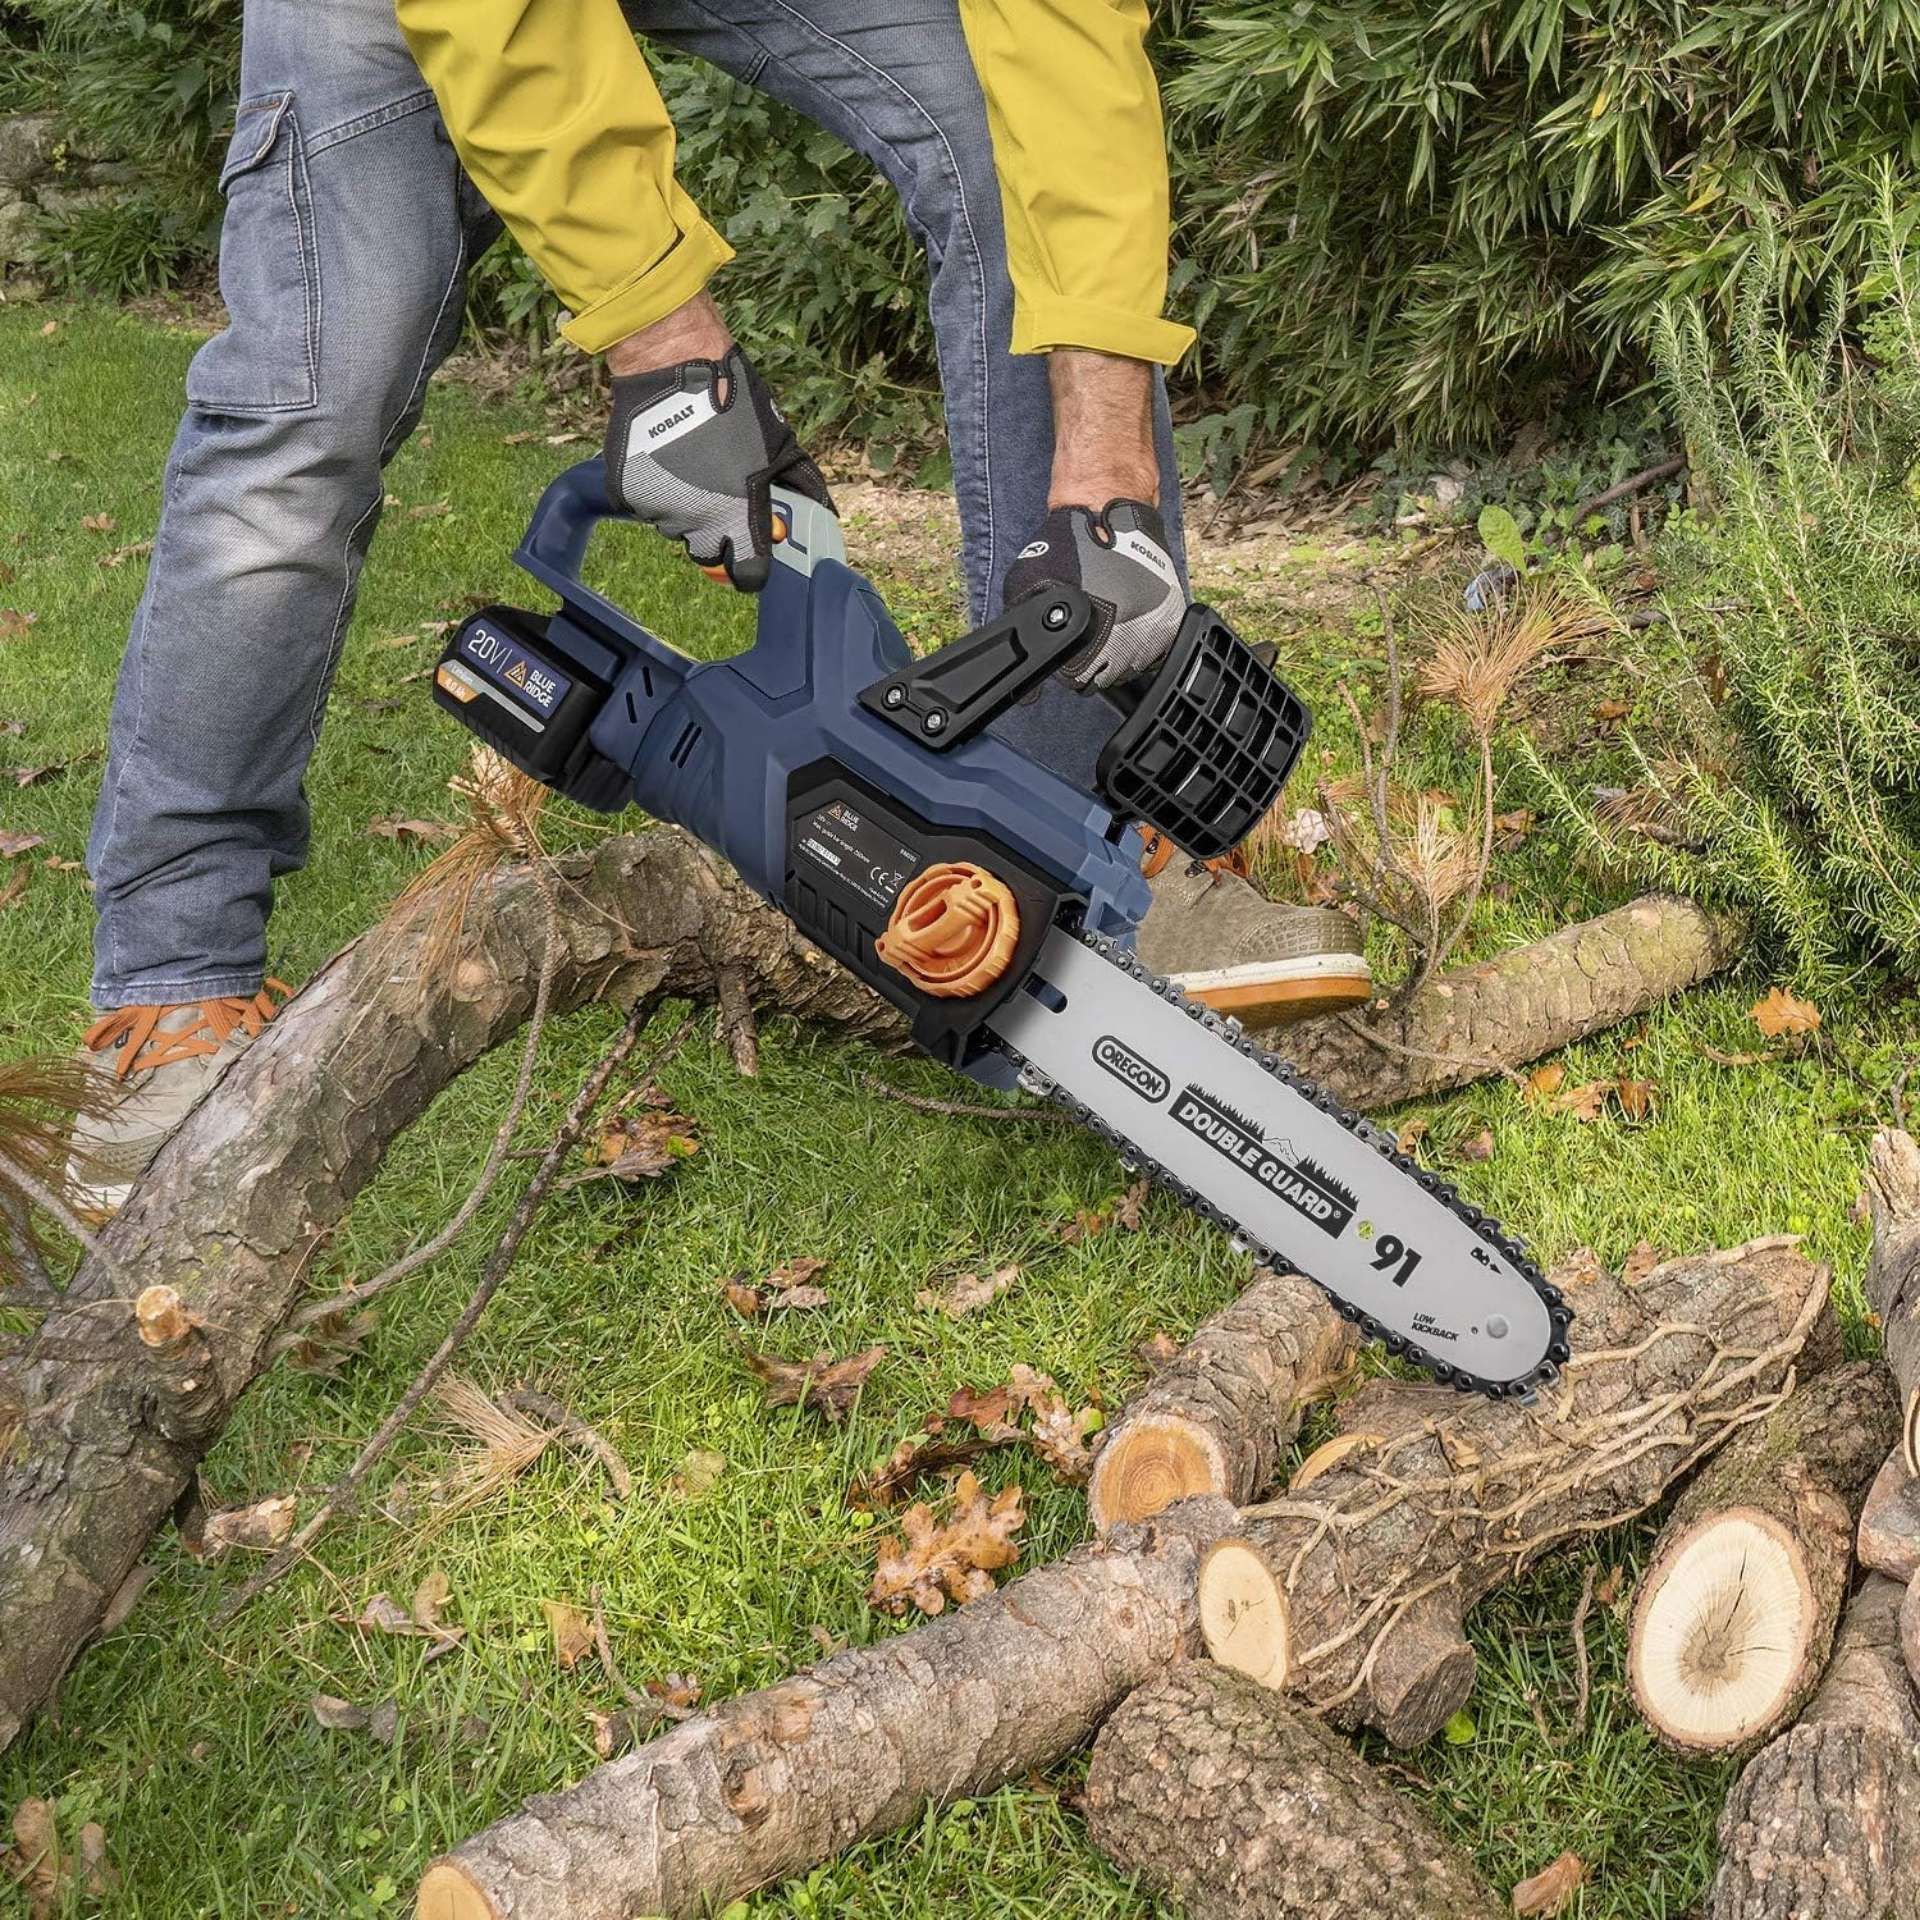 TRADE LOT 5 X NEW & BOXED BLUE RIDGE 25CM 18V Chainsaw with 4.0 Ah Li-ion Battery. RRP £119 EACH. - Image 4 of 4